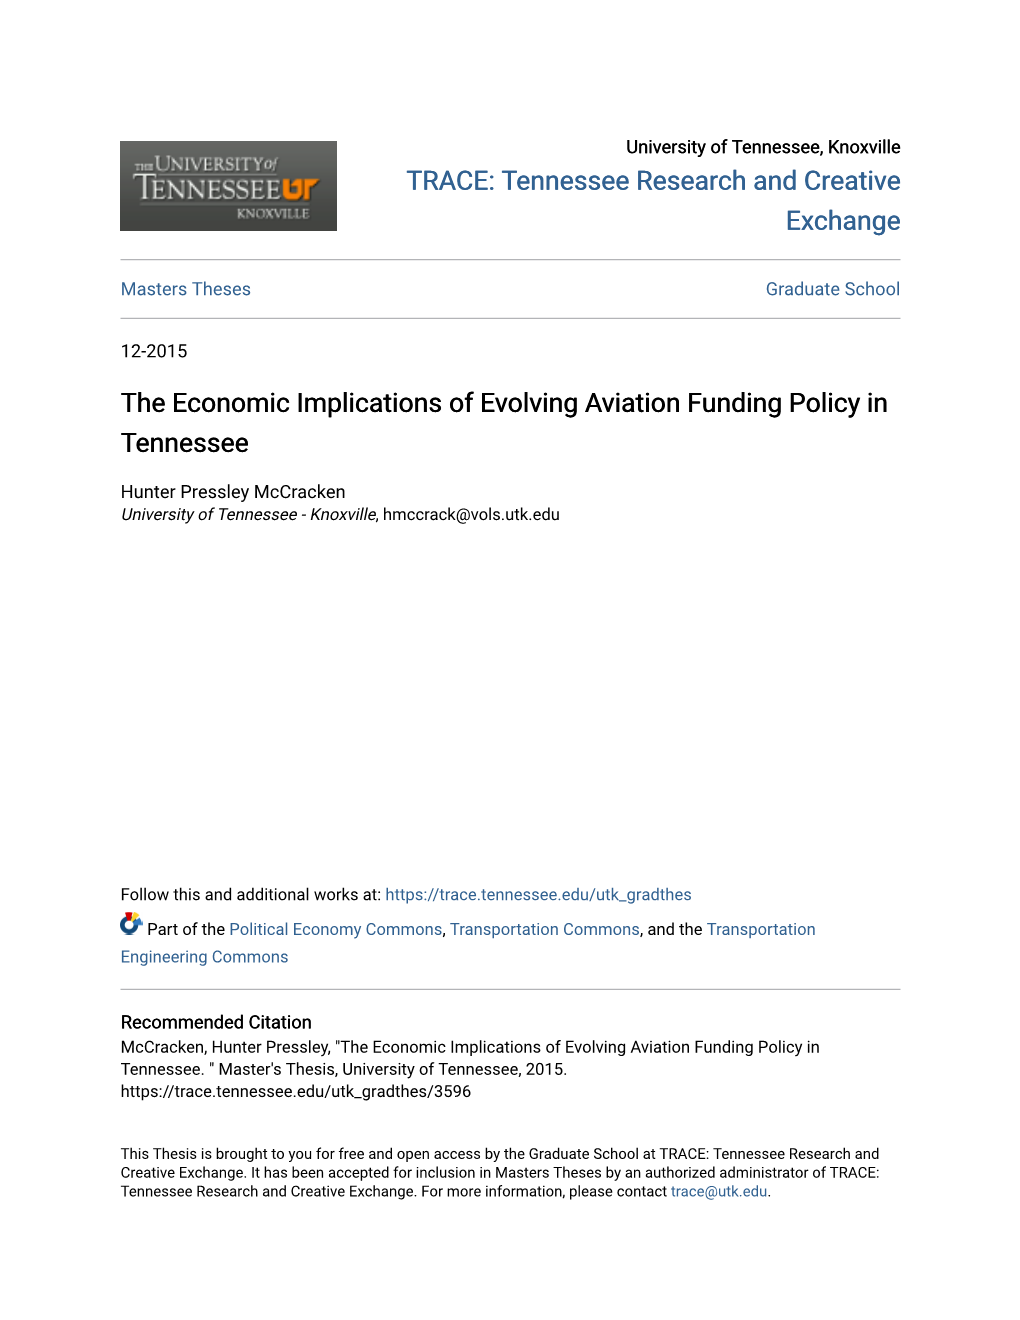 The Economic Implications of Evolving Aviation Funding Policy in Tennessee